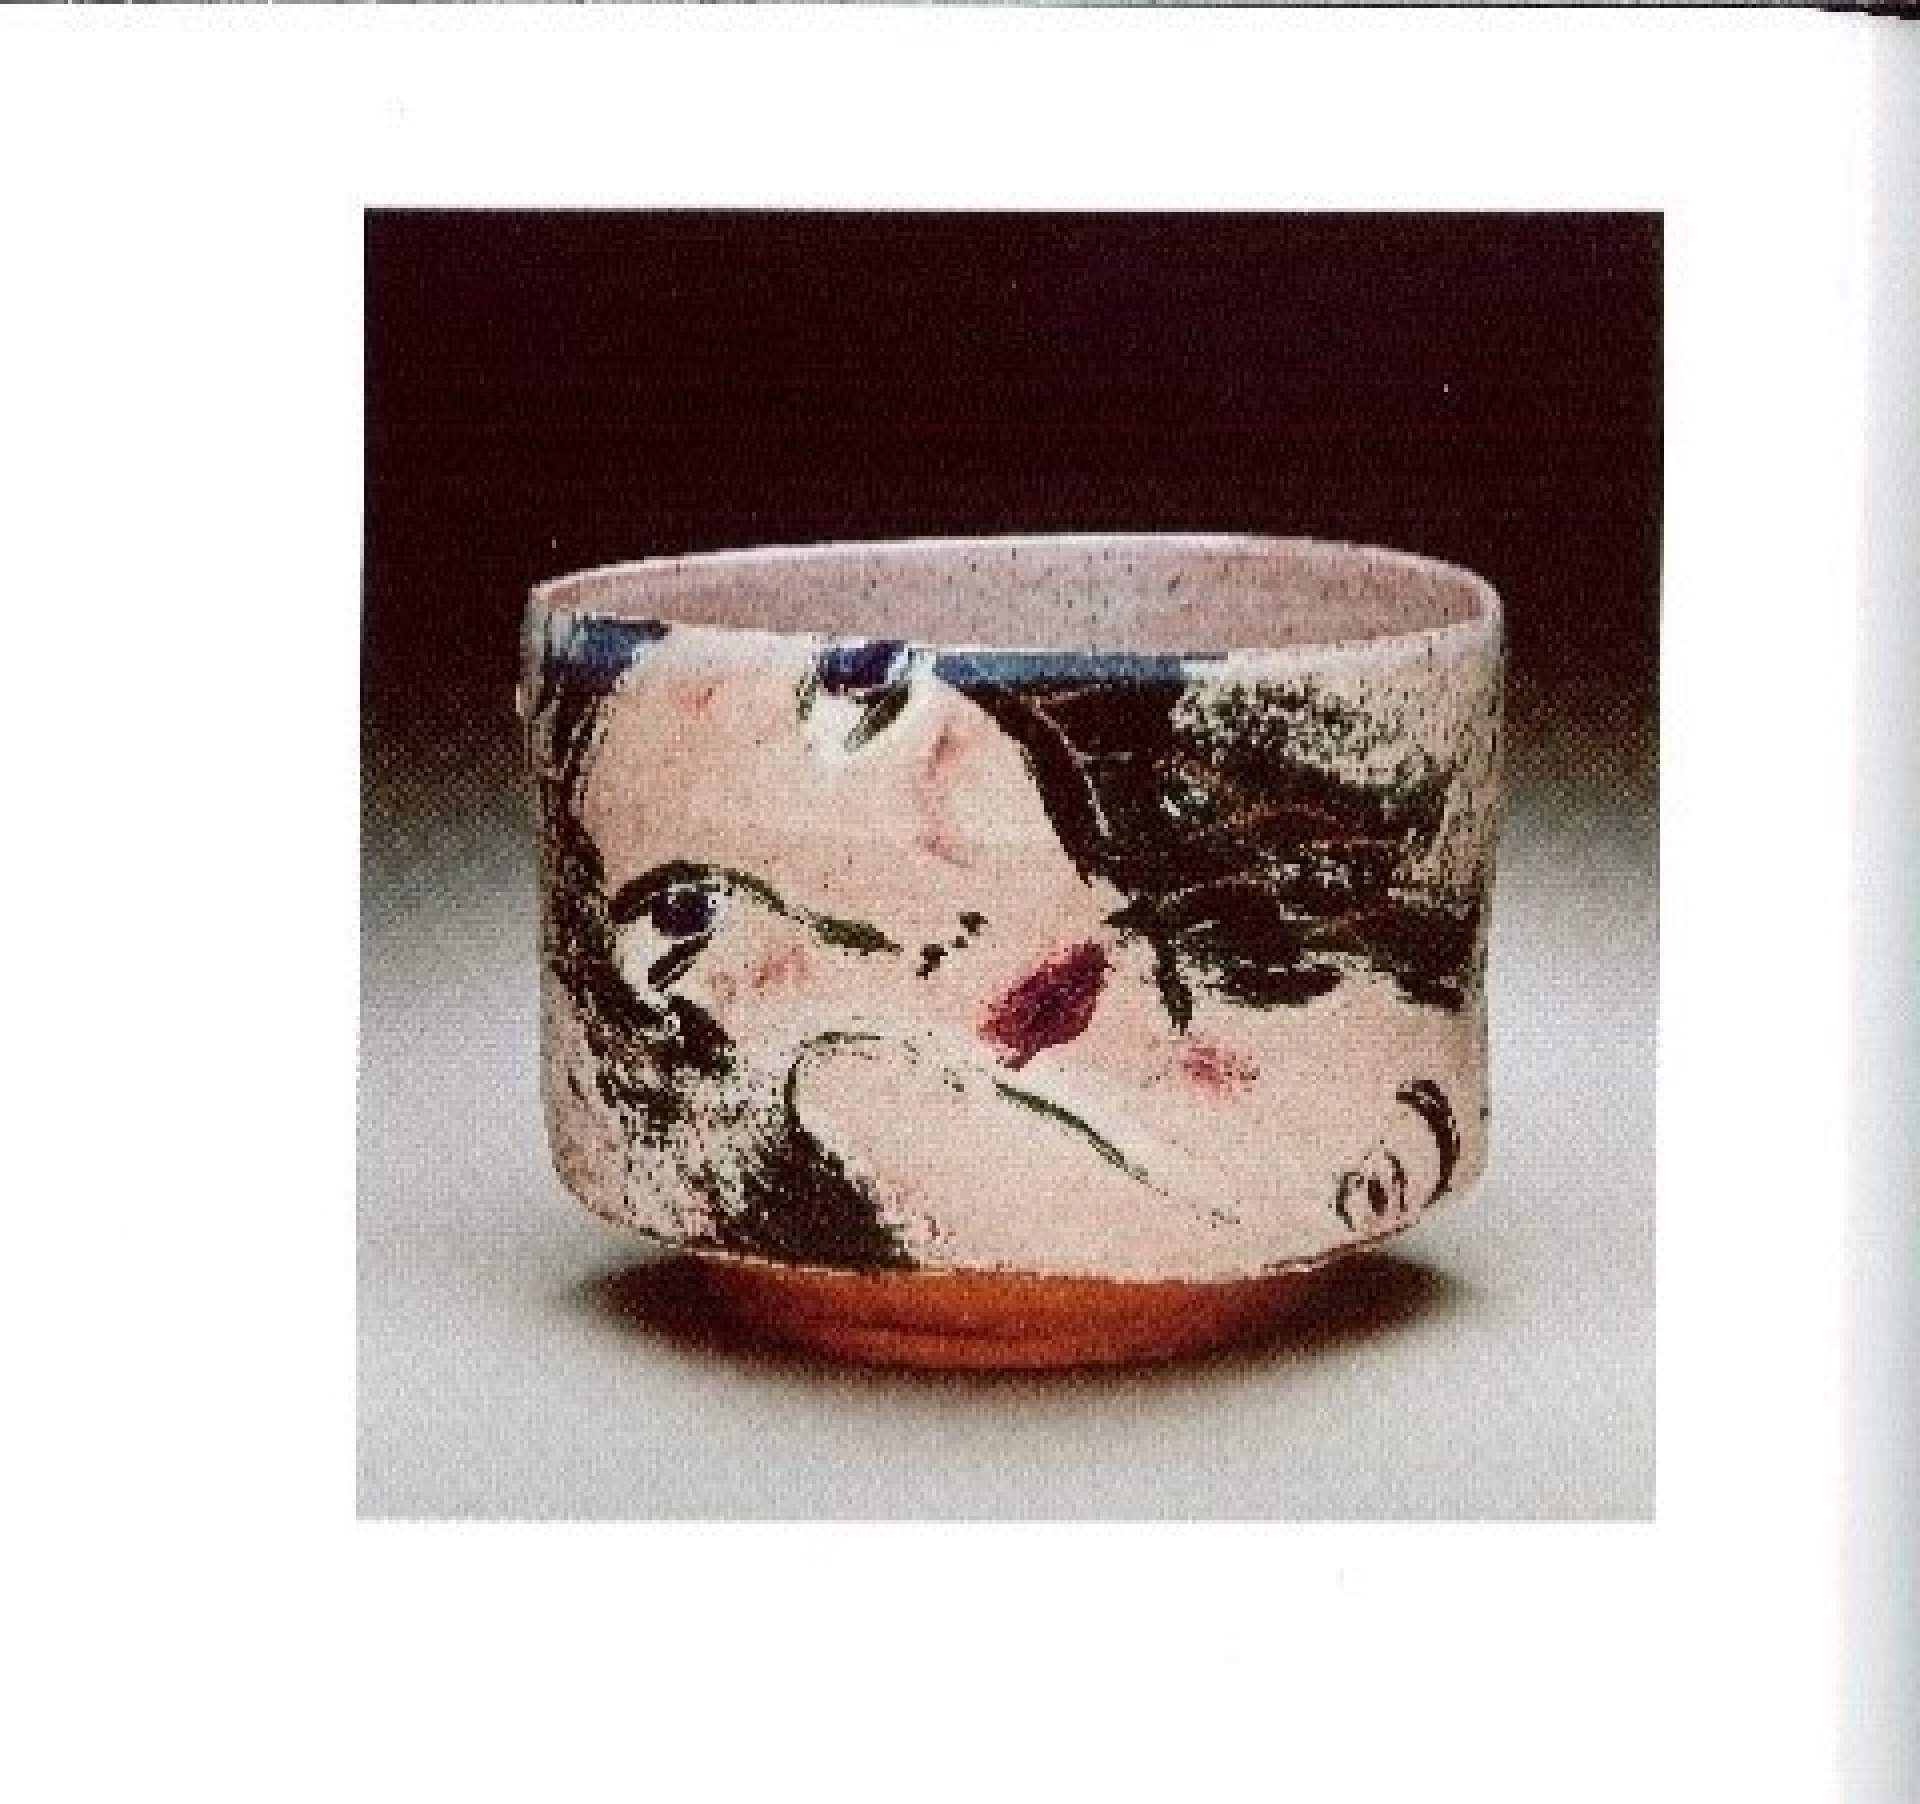 Yunomi (Tea Bowl) with Femme